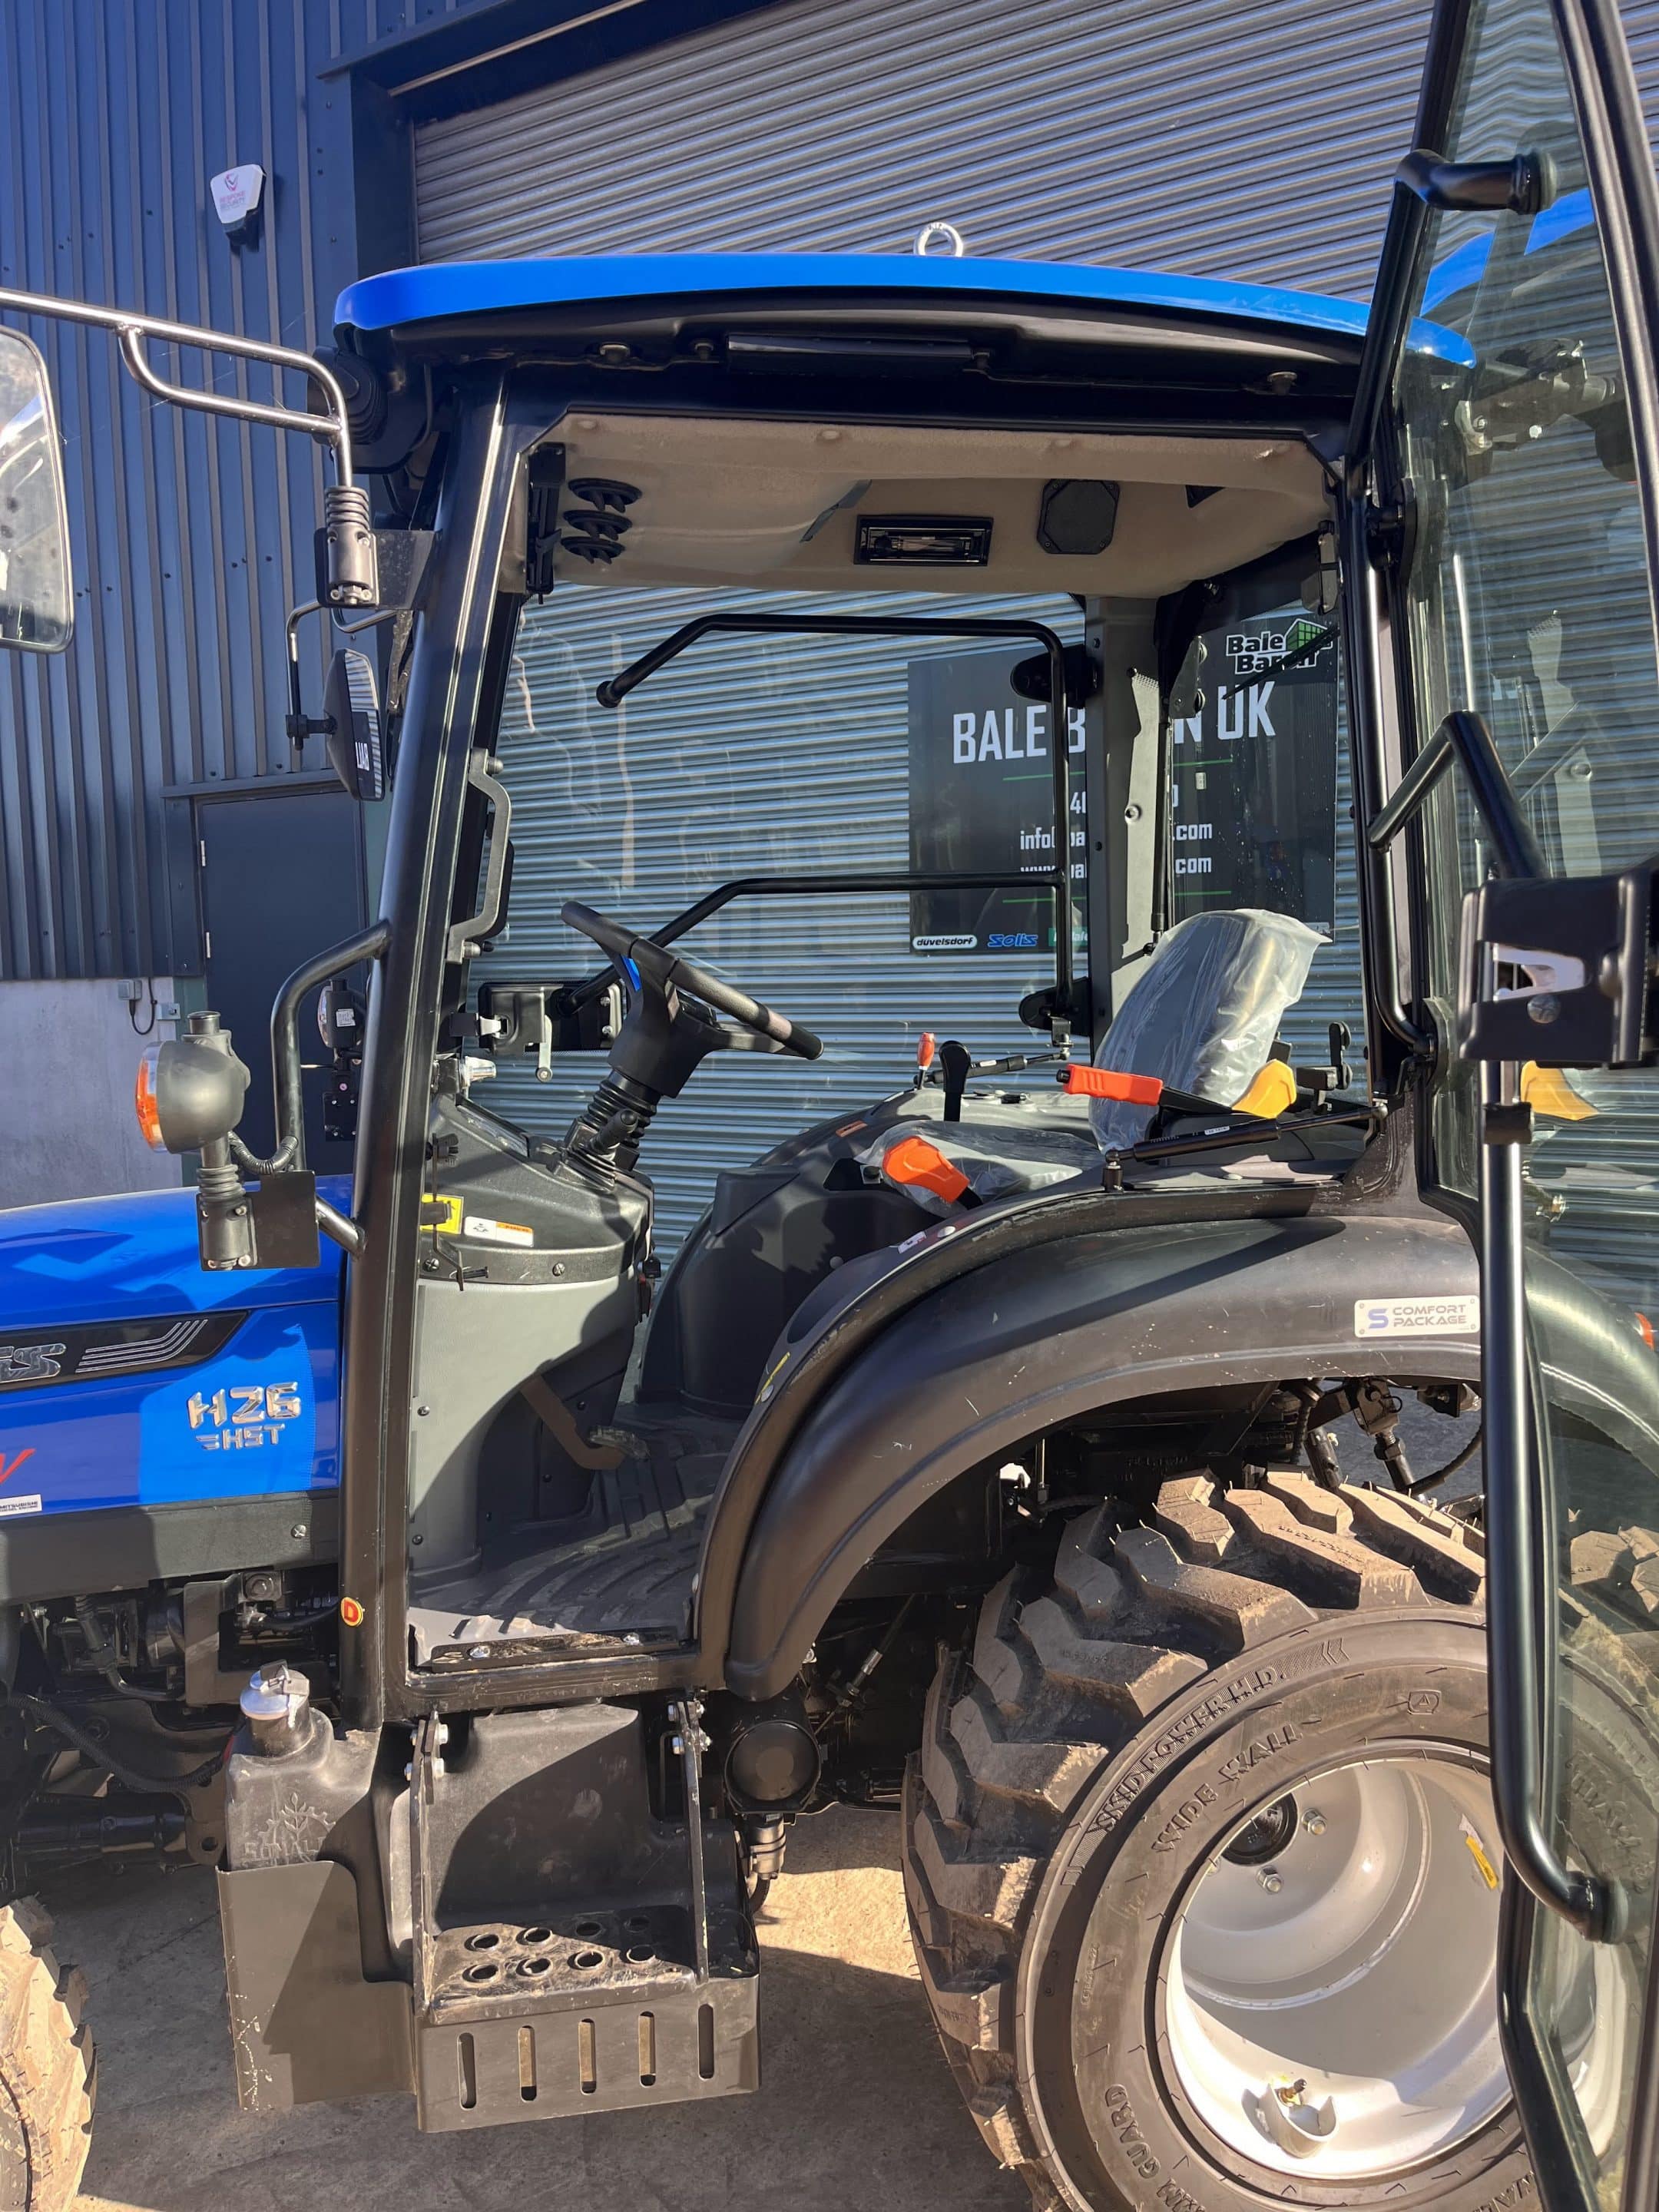 New Solis 26 HST Cab Compact Tractor - Bale Baron UK